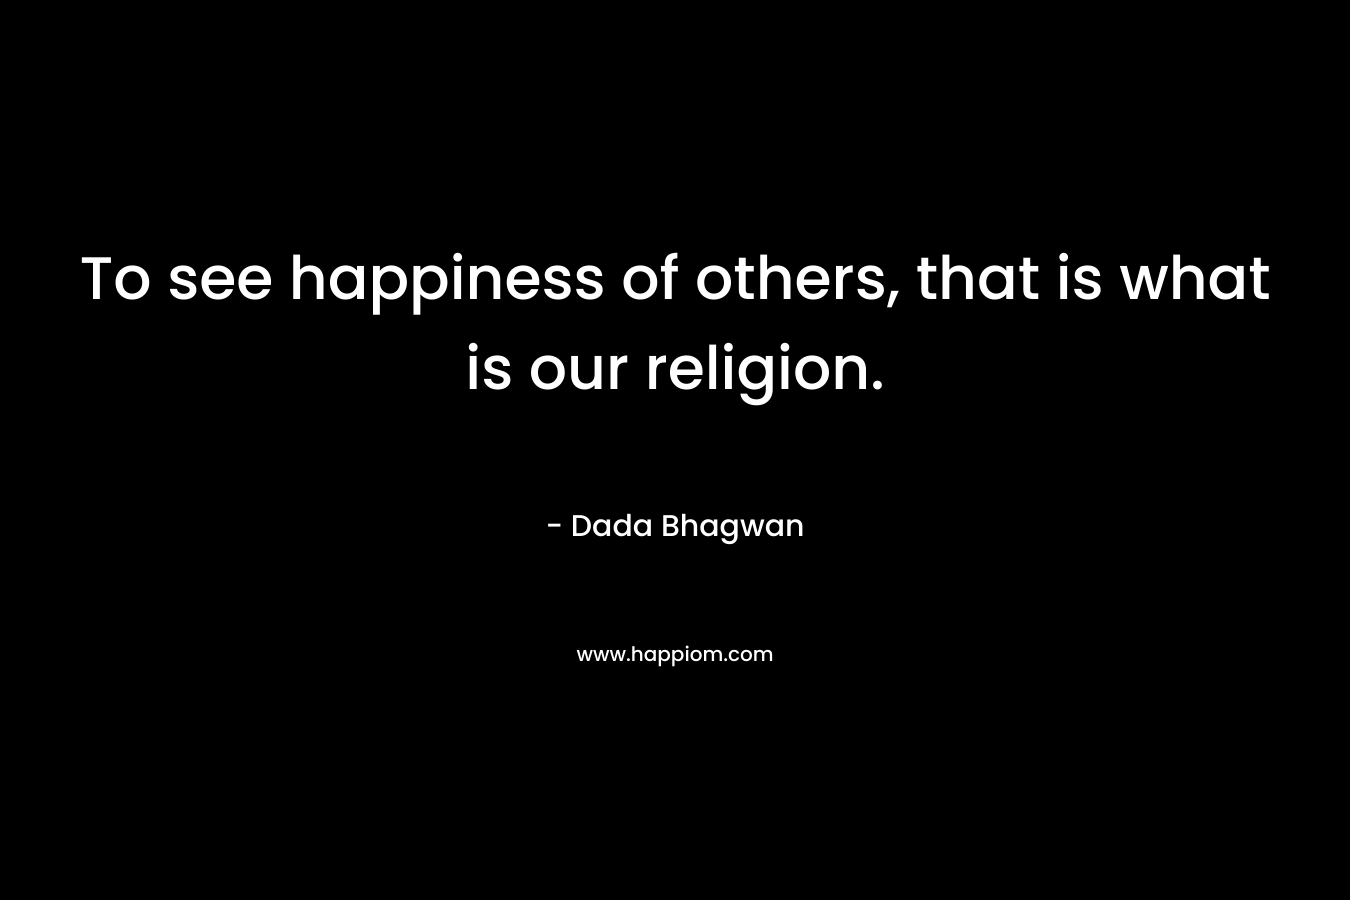 To see happiness of others, that is what is our religion.